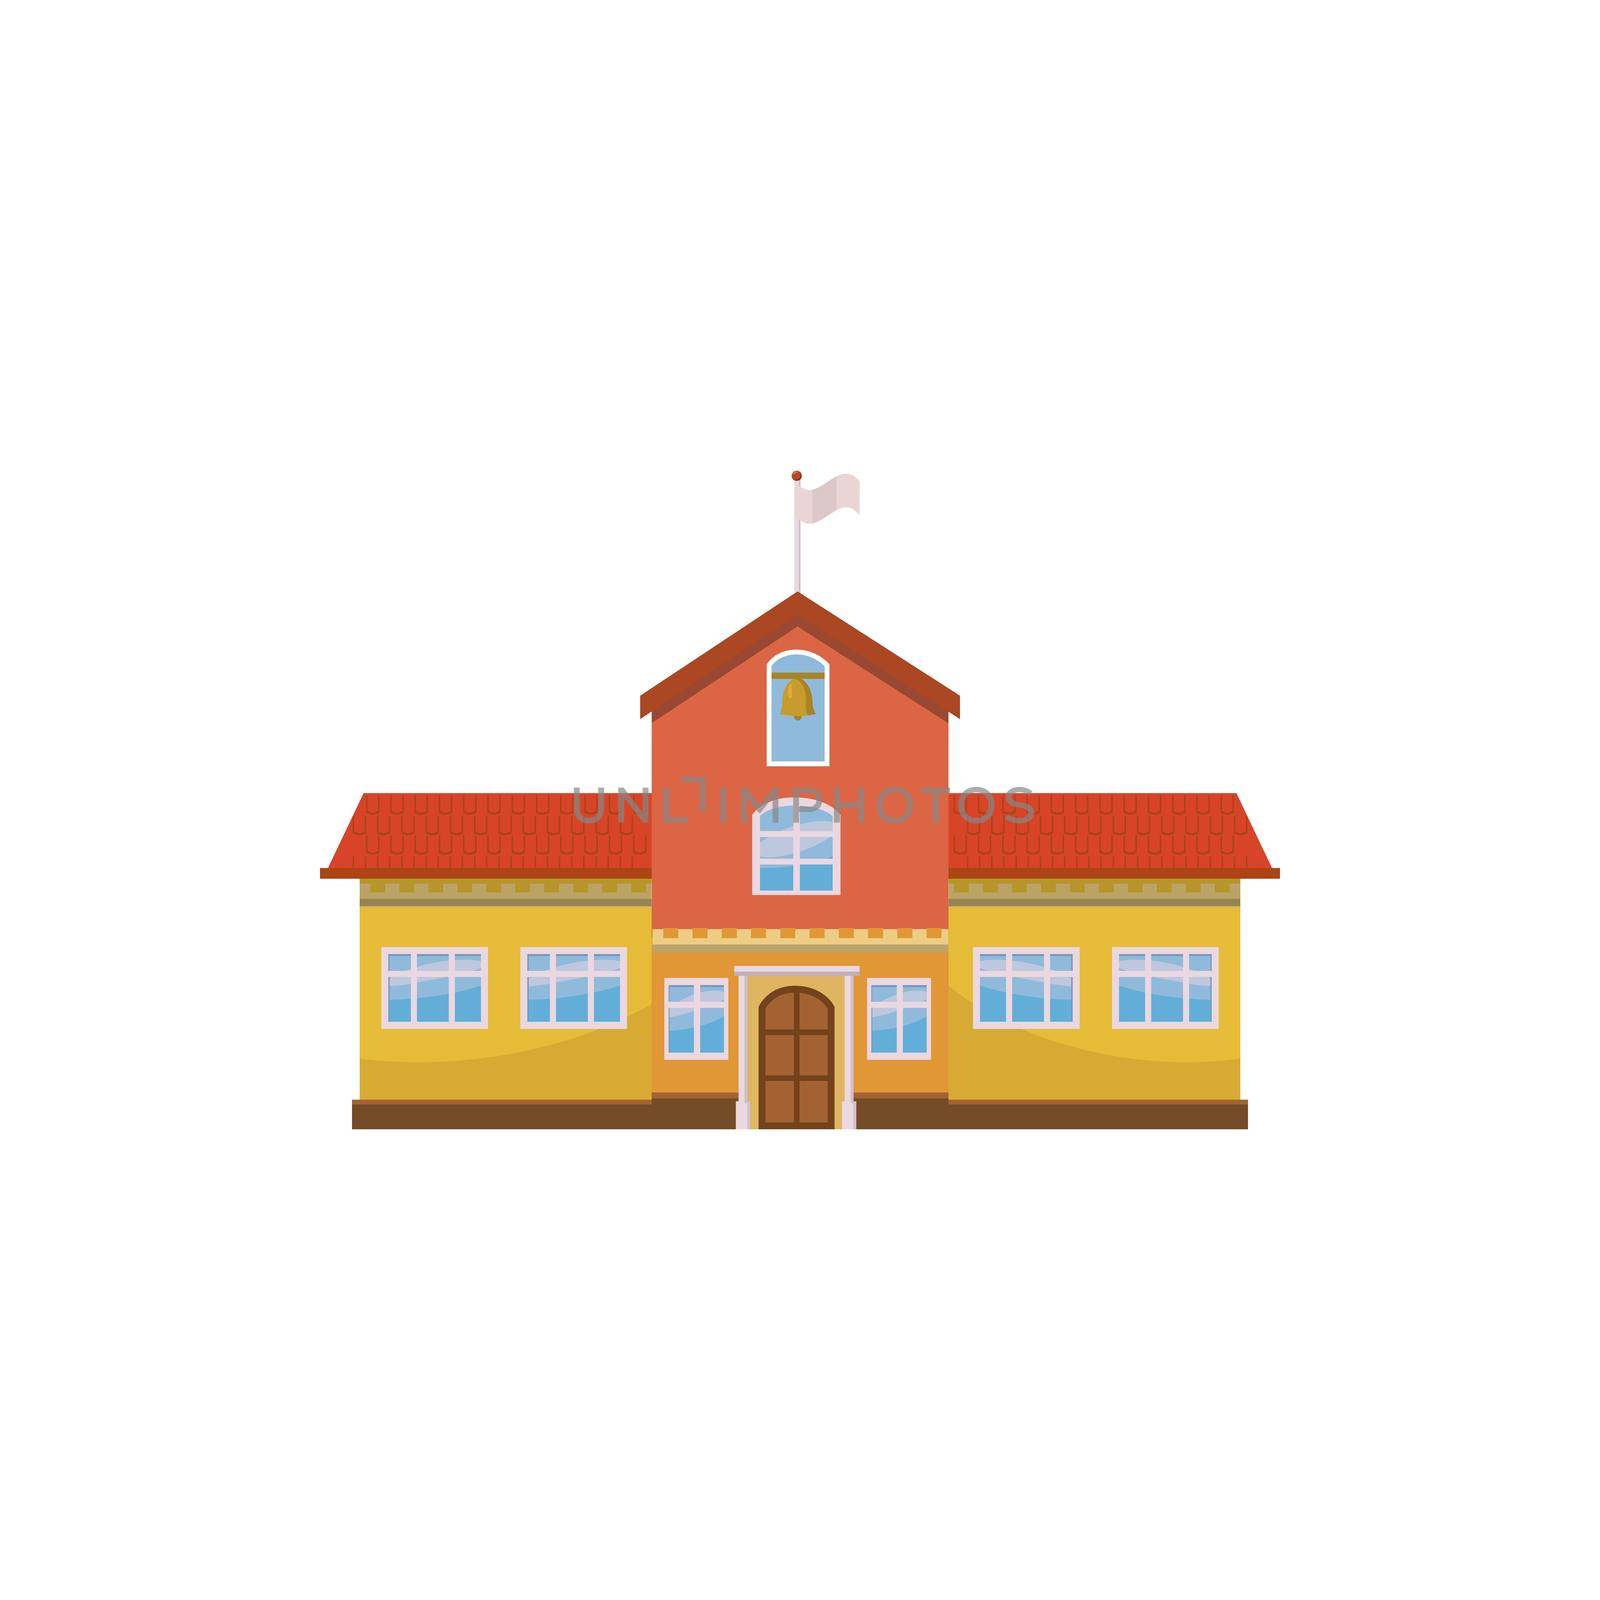 School building icon, cartoon style by ylivdesign